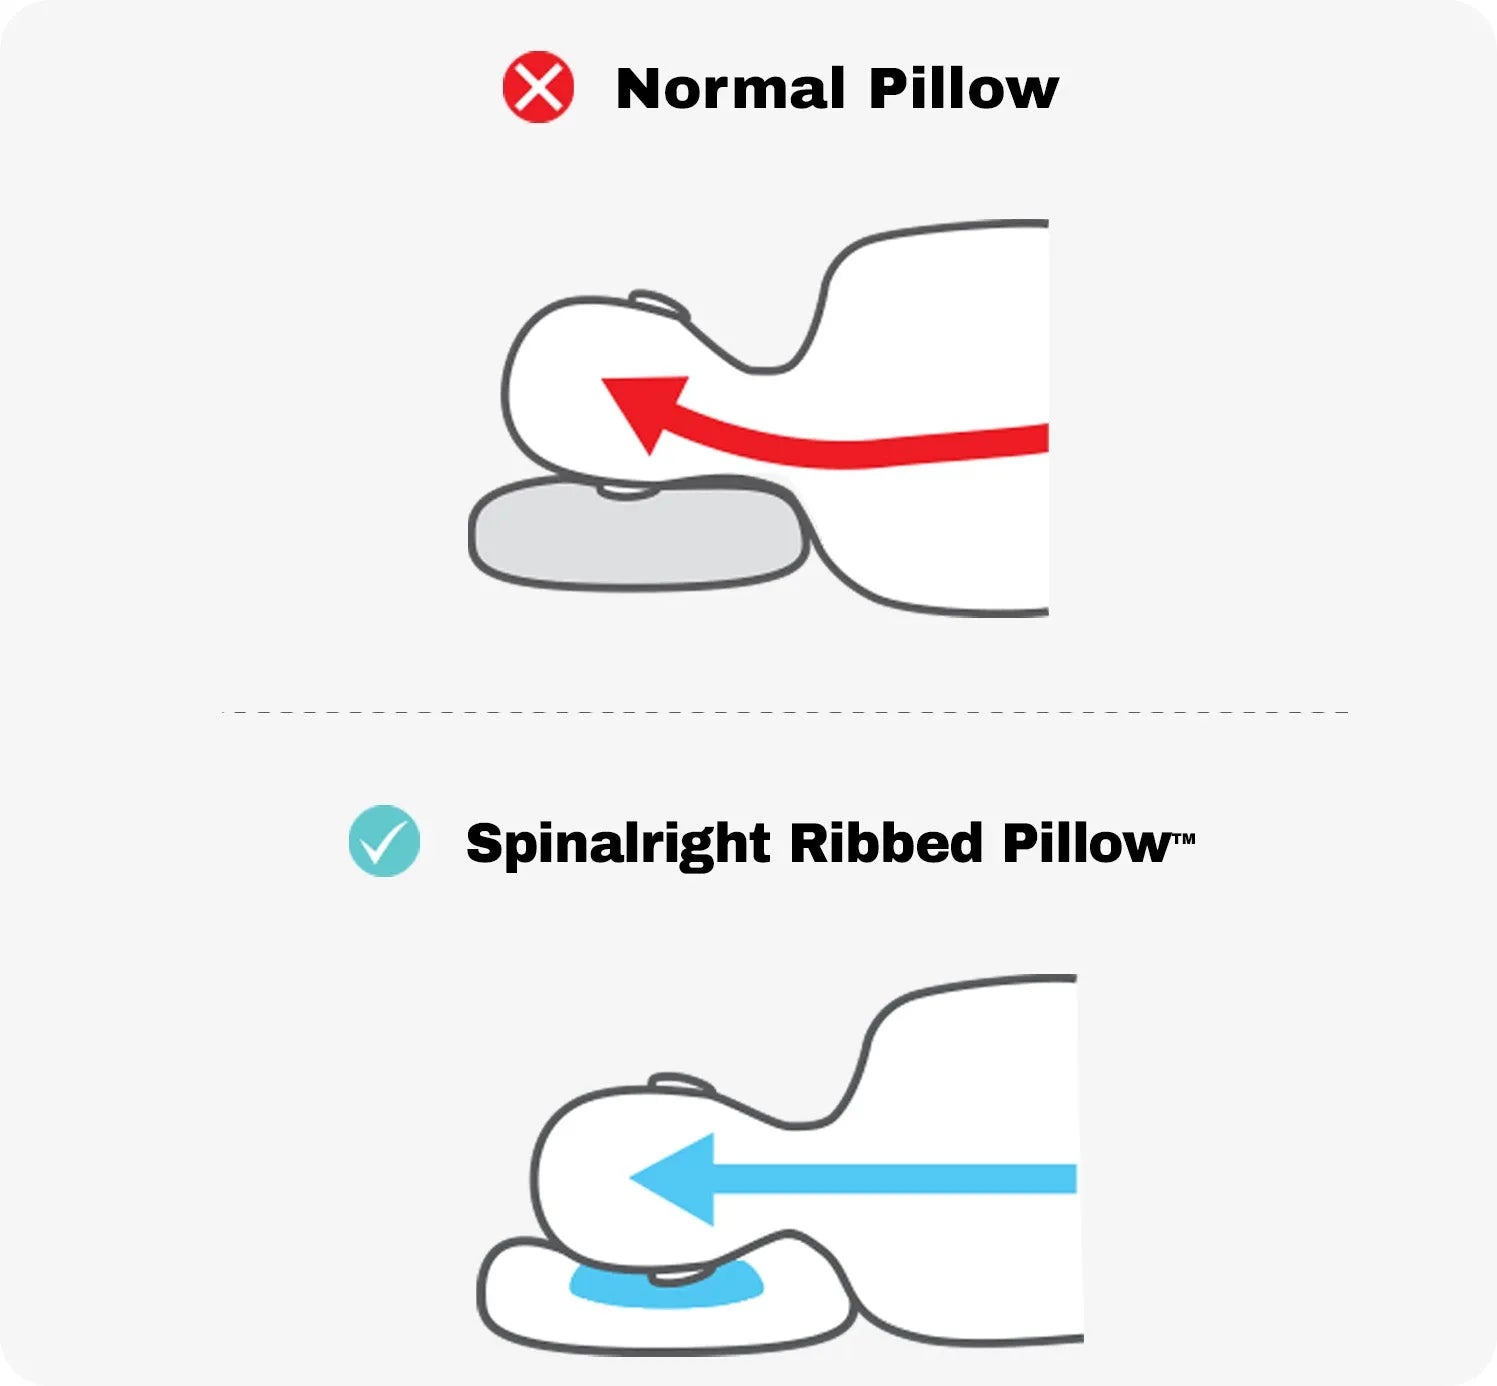 files/spinal_right_pillow_icon_1a86c037-ab16-4432-9caa-35c19145d0aa.webp